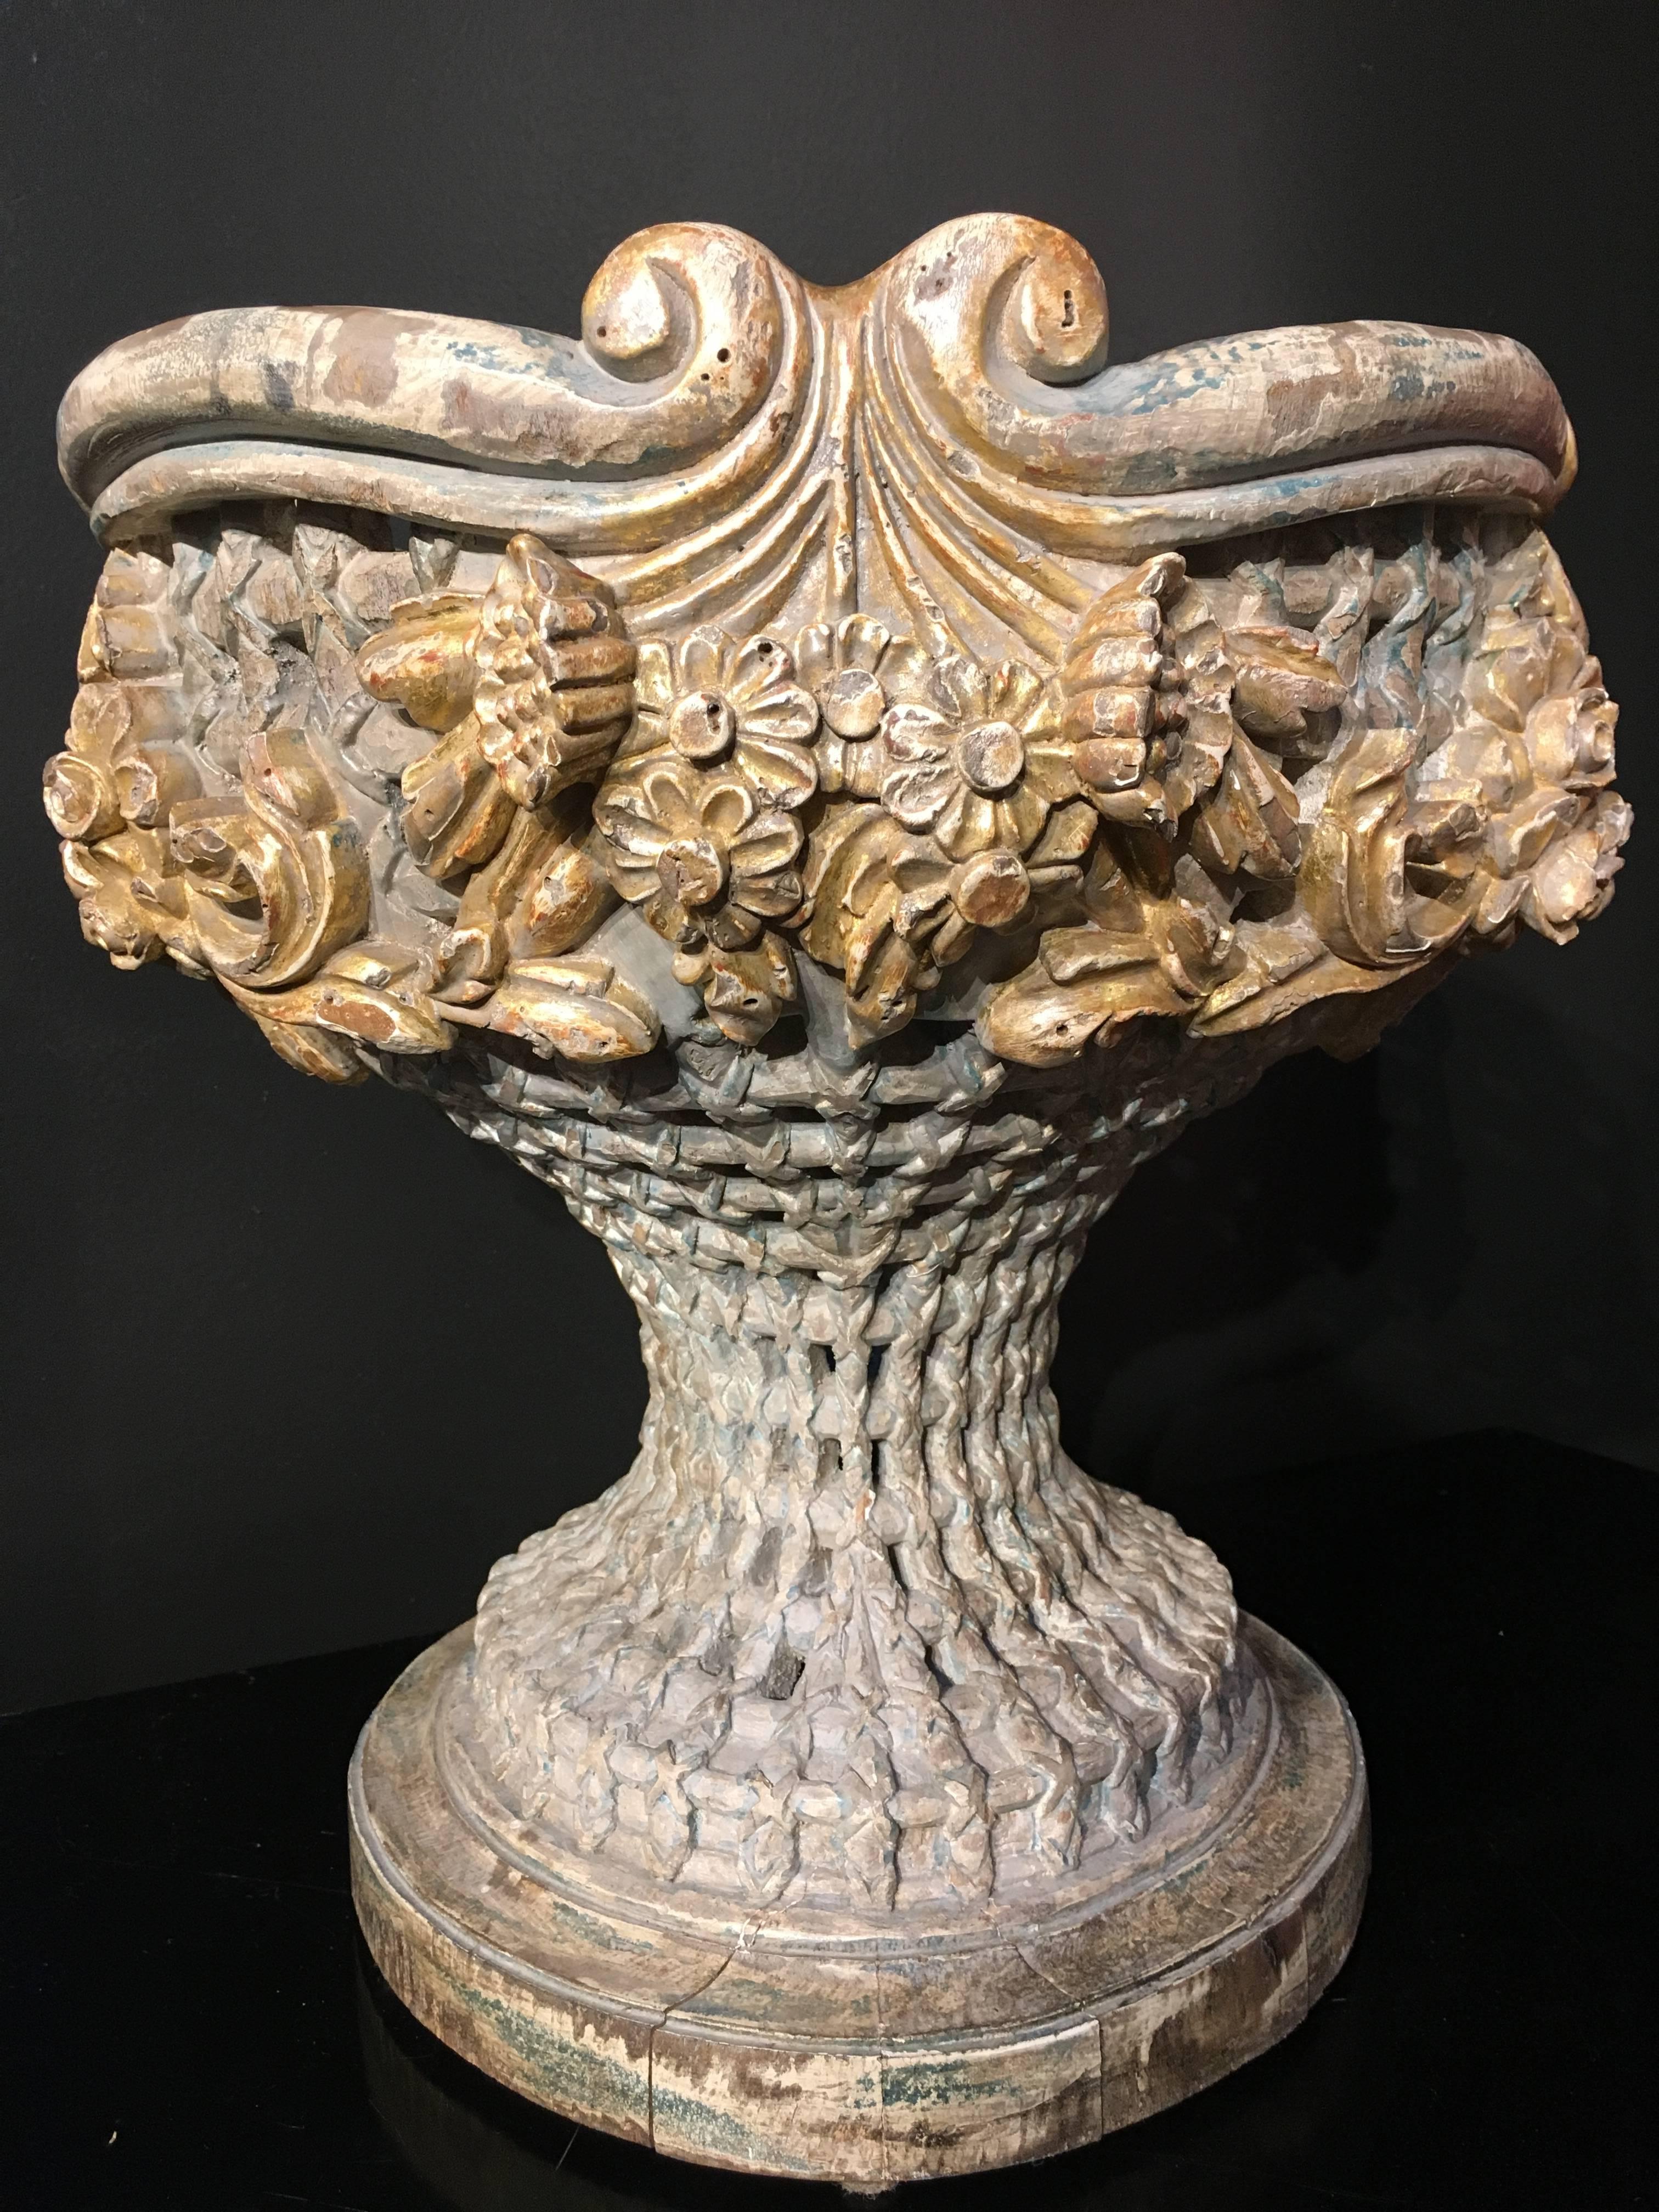 A finely carved Italian Empire Revival, polychromed and giltwood jardiniere or centerpiece, dating to circa 1900. The wooden vessel of gracious and elegant form, meticulously carved and reticulated to mimic a woven basket, with lush garlands of